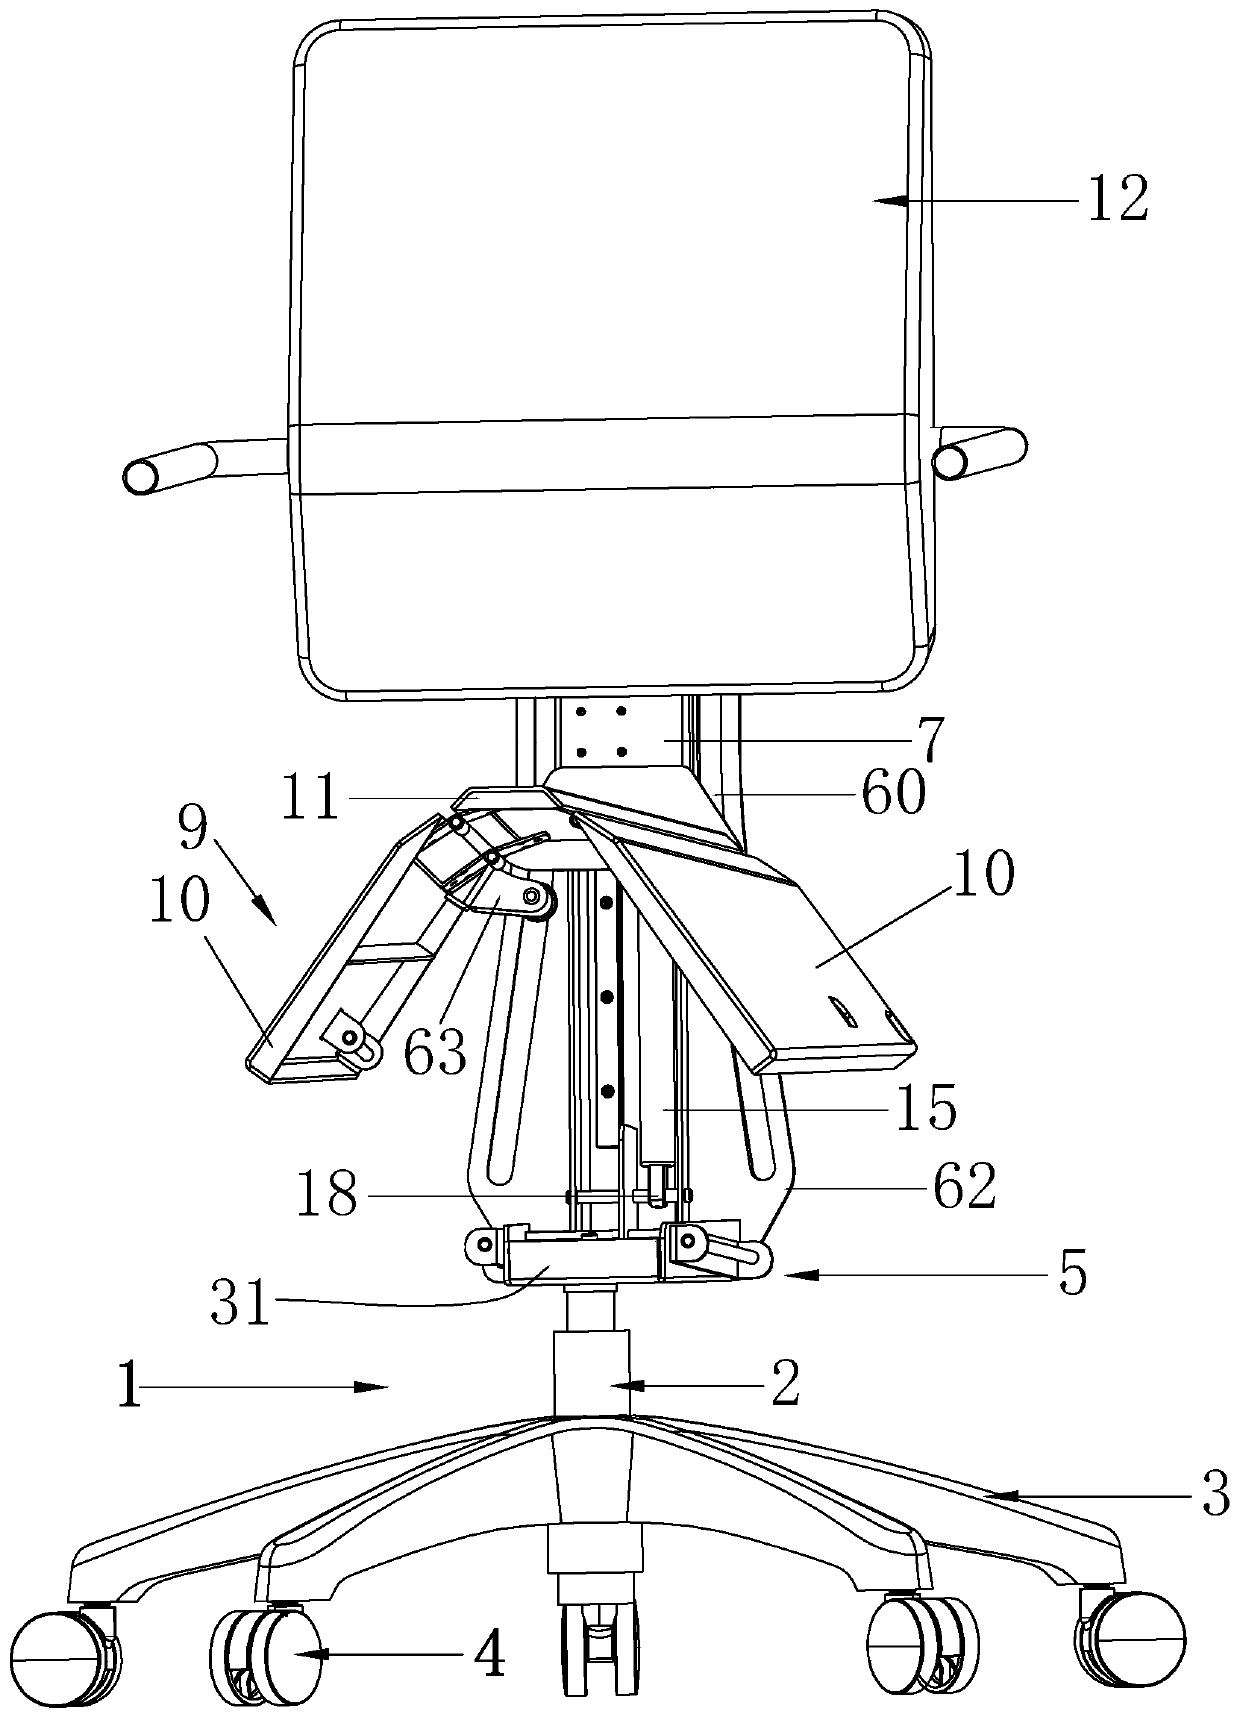 High-safety sitting and standing work chair